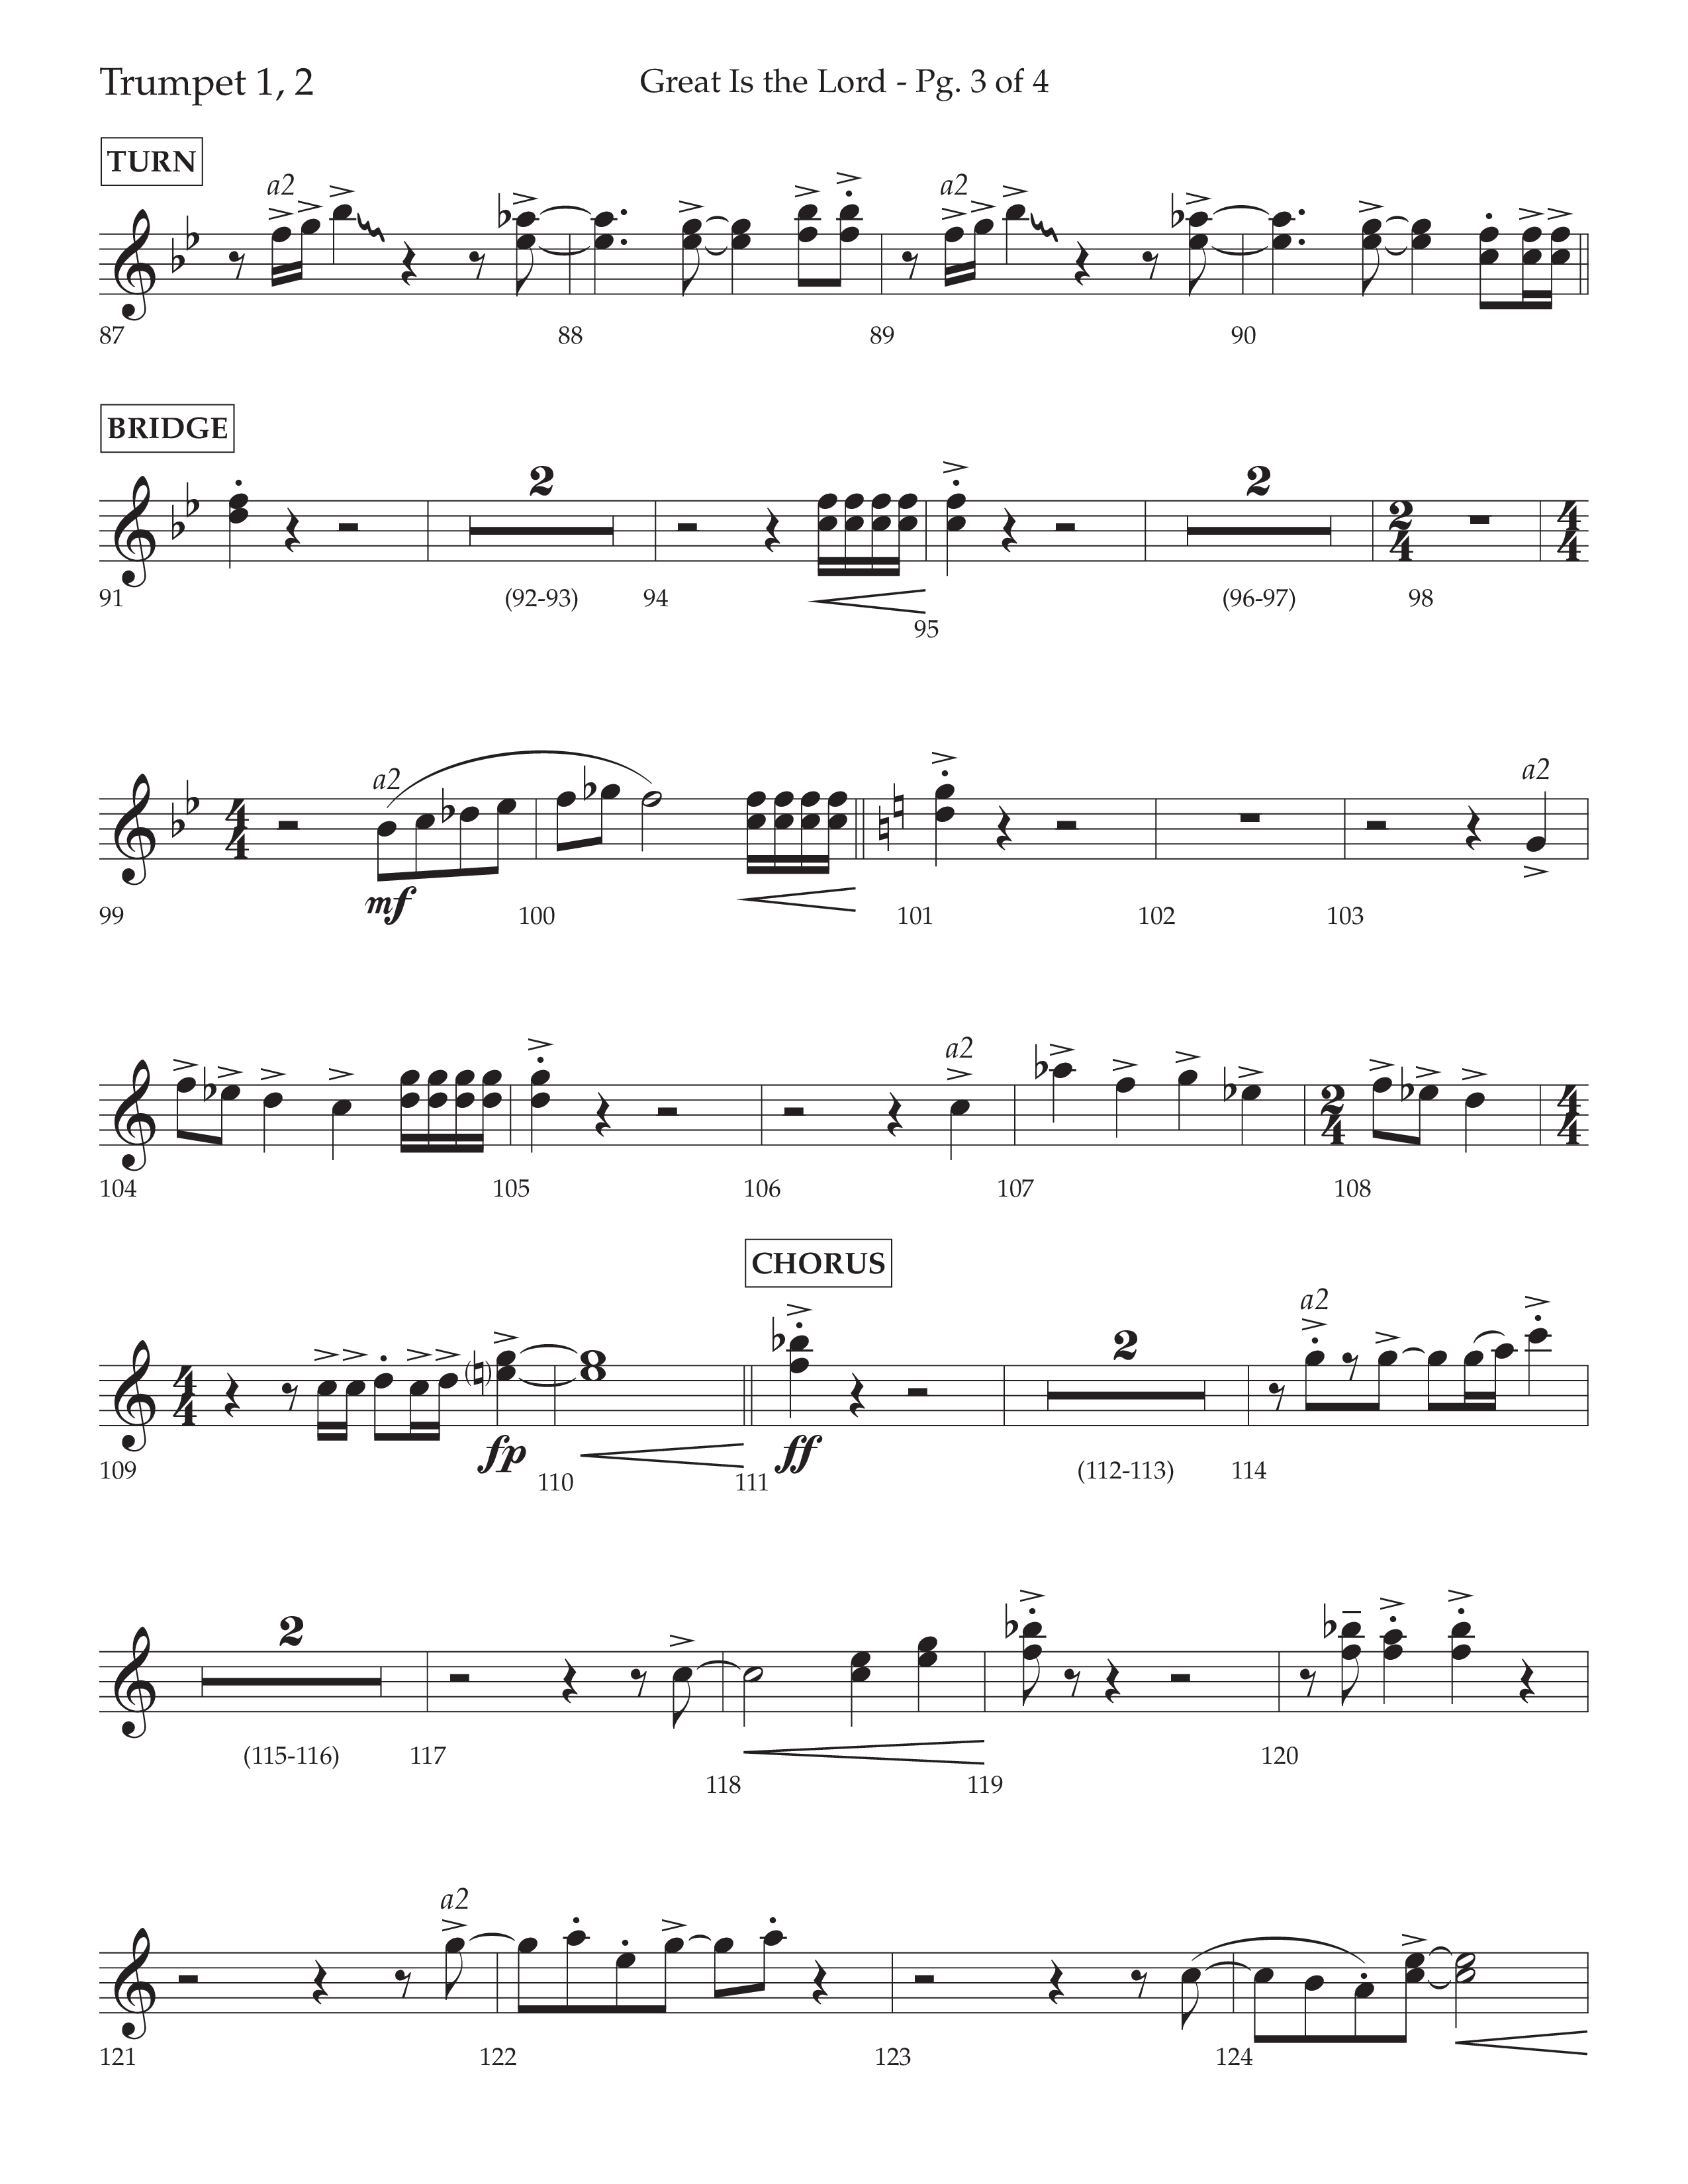 Great Is The Lord (with Blessing And Honor) (Choral Anthem SATB) Trumpet 1,2 (Lifeway Choral / Arr. David Wise / Orch. Bradley Knight)